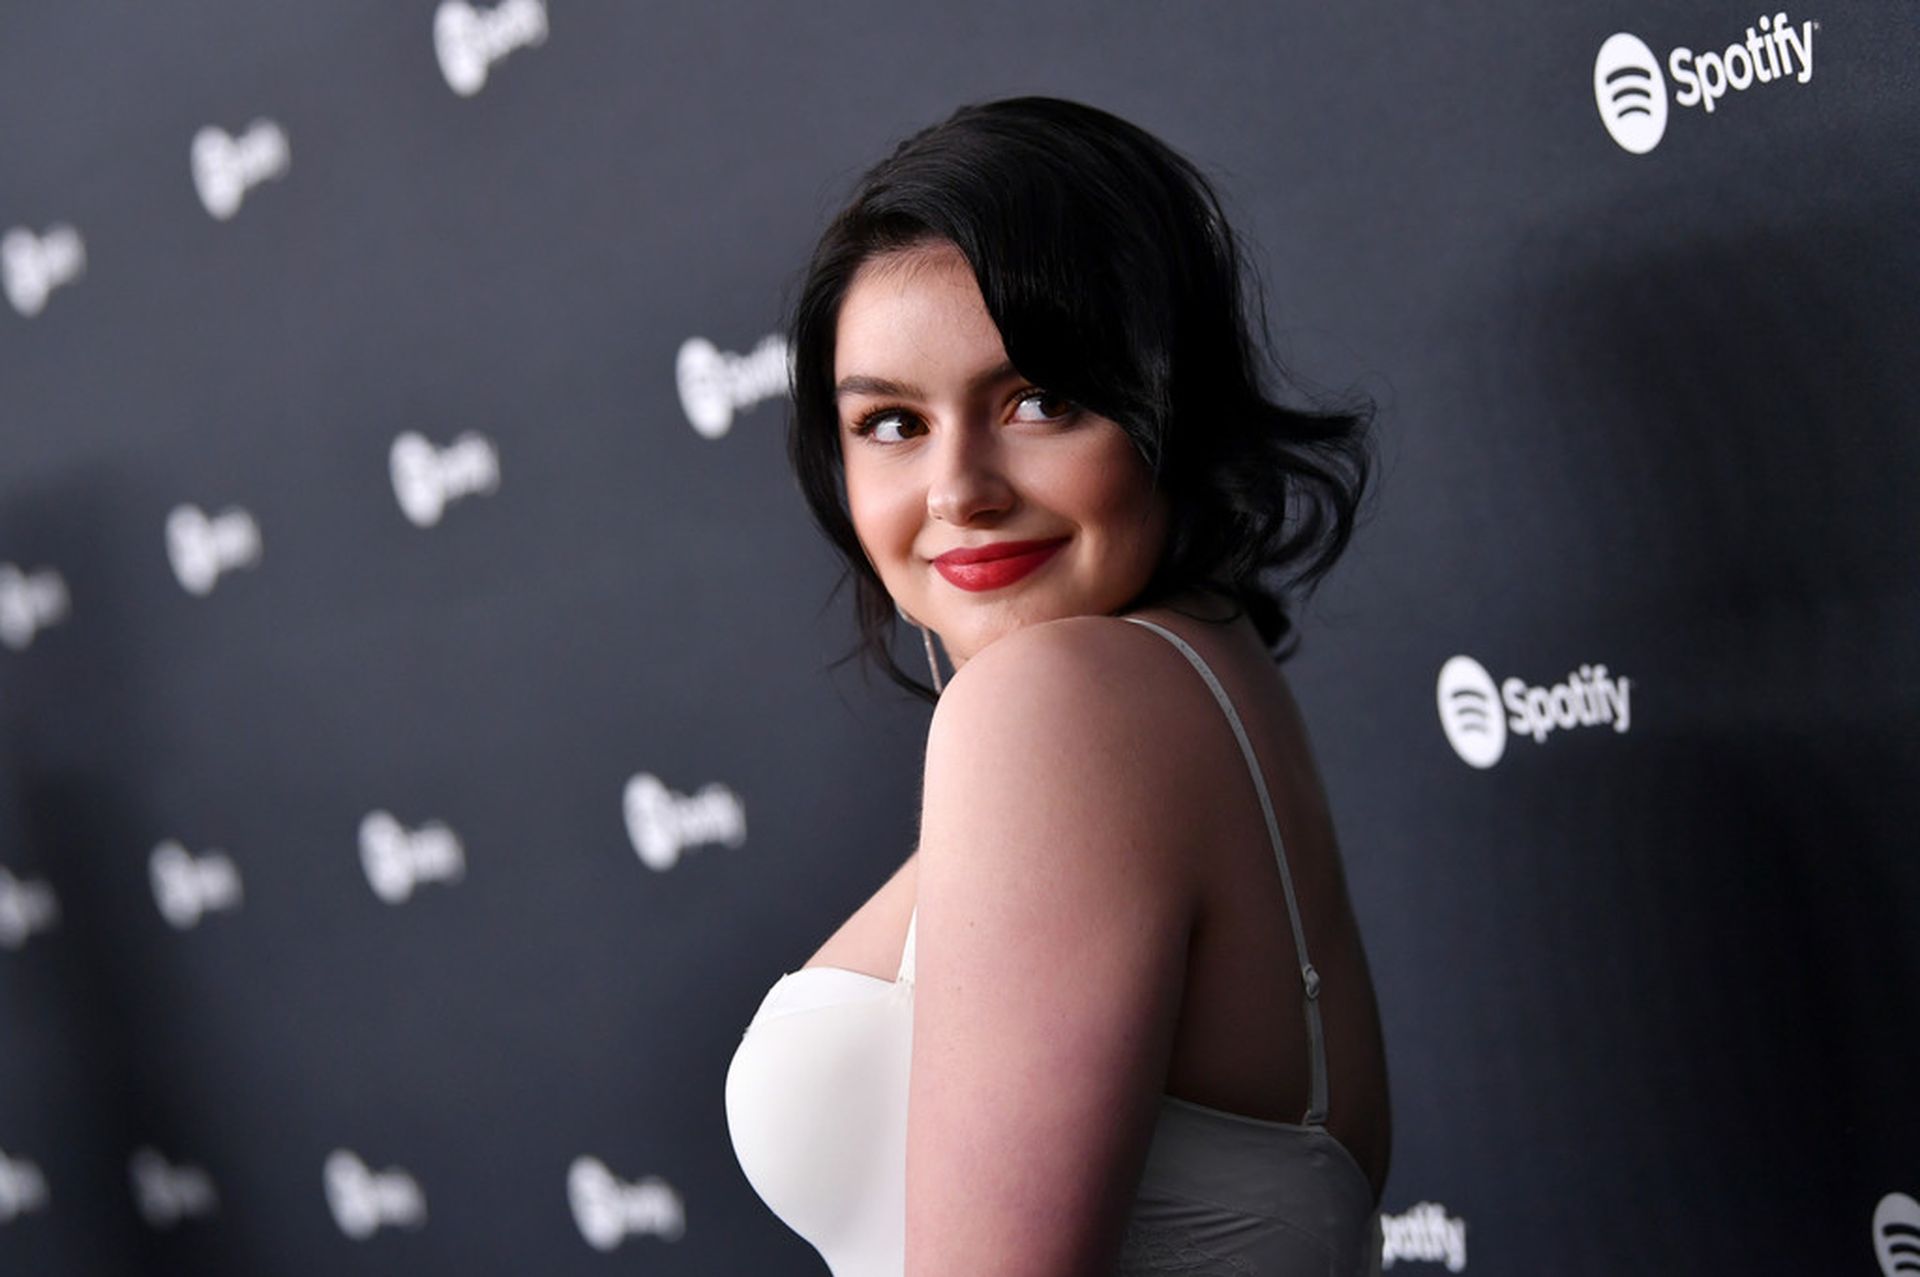 Ariel Winter Shows Her Cleavage At The Best New Artist Party 0026